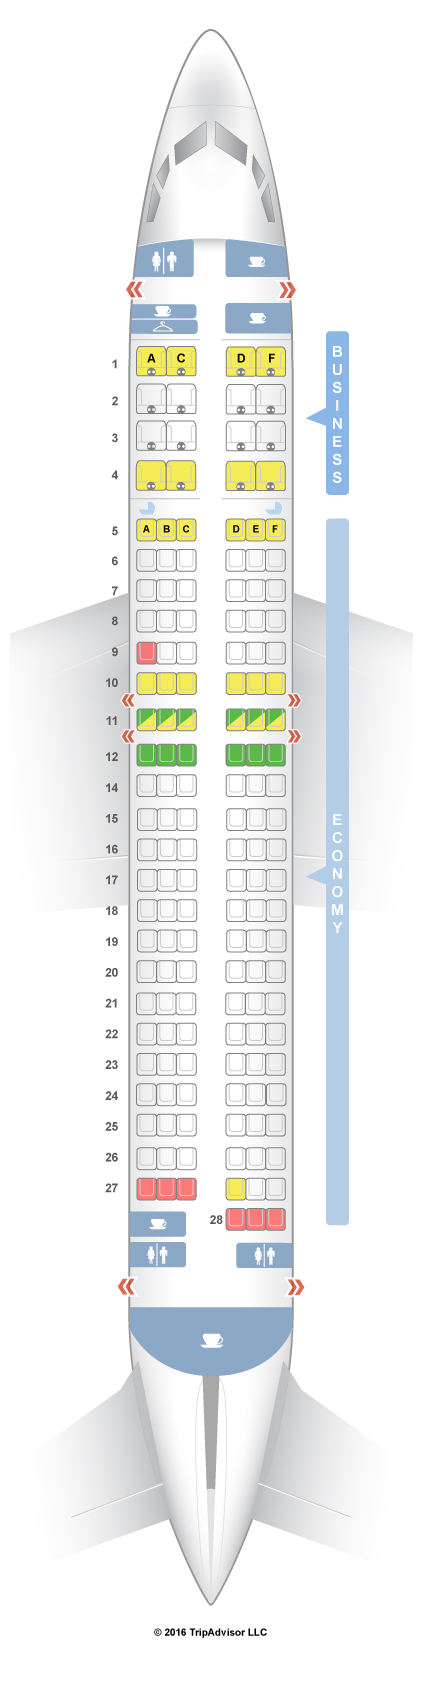 Turkish Airlines Boeing 737 800 Seat Map